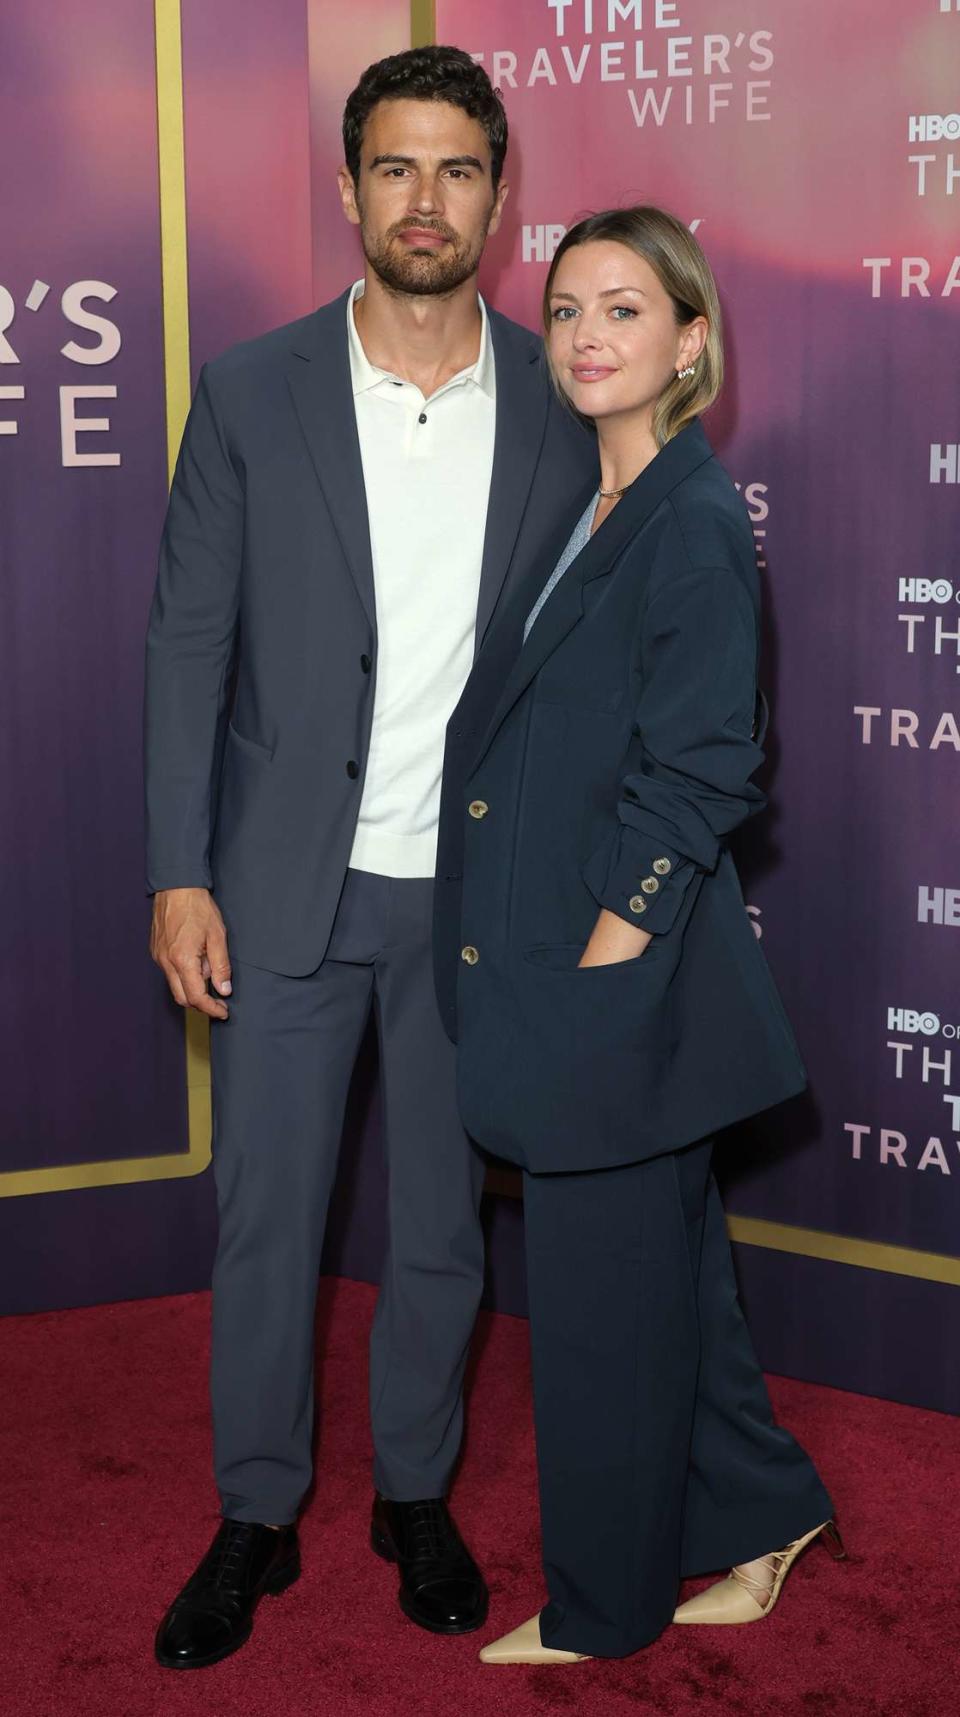 Theo James and Ruth Kearney attend HBO's "The Time Traveler's Wife" New York Premiere at The Morgan Library on May 11, 2022 in New York City